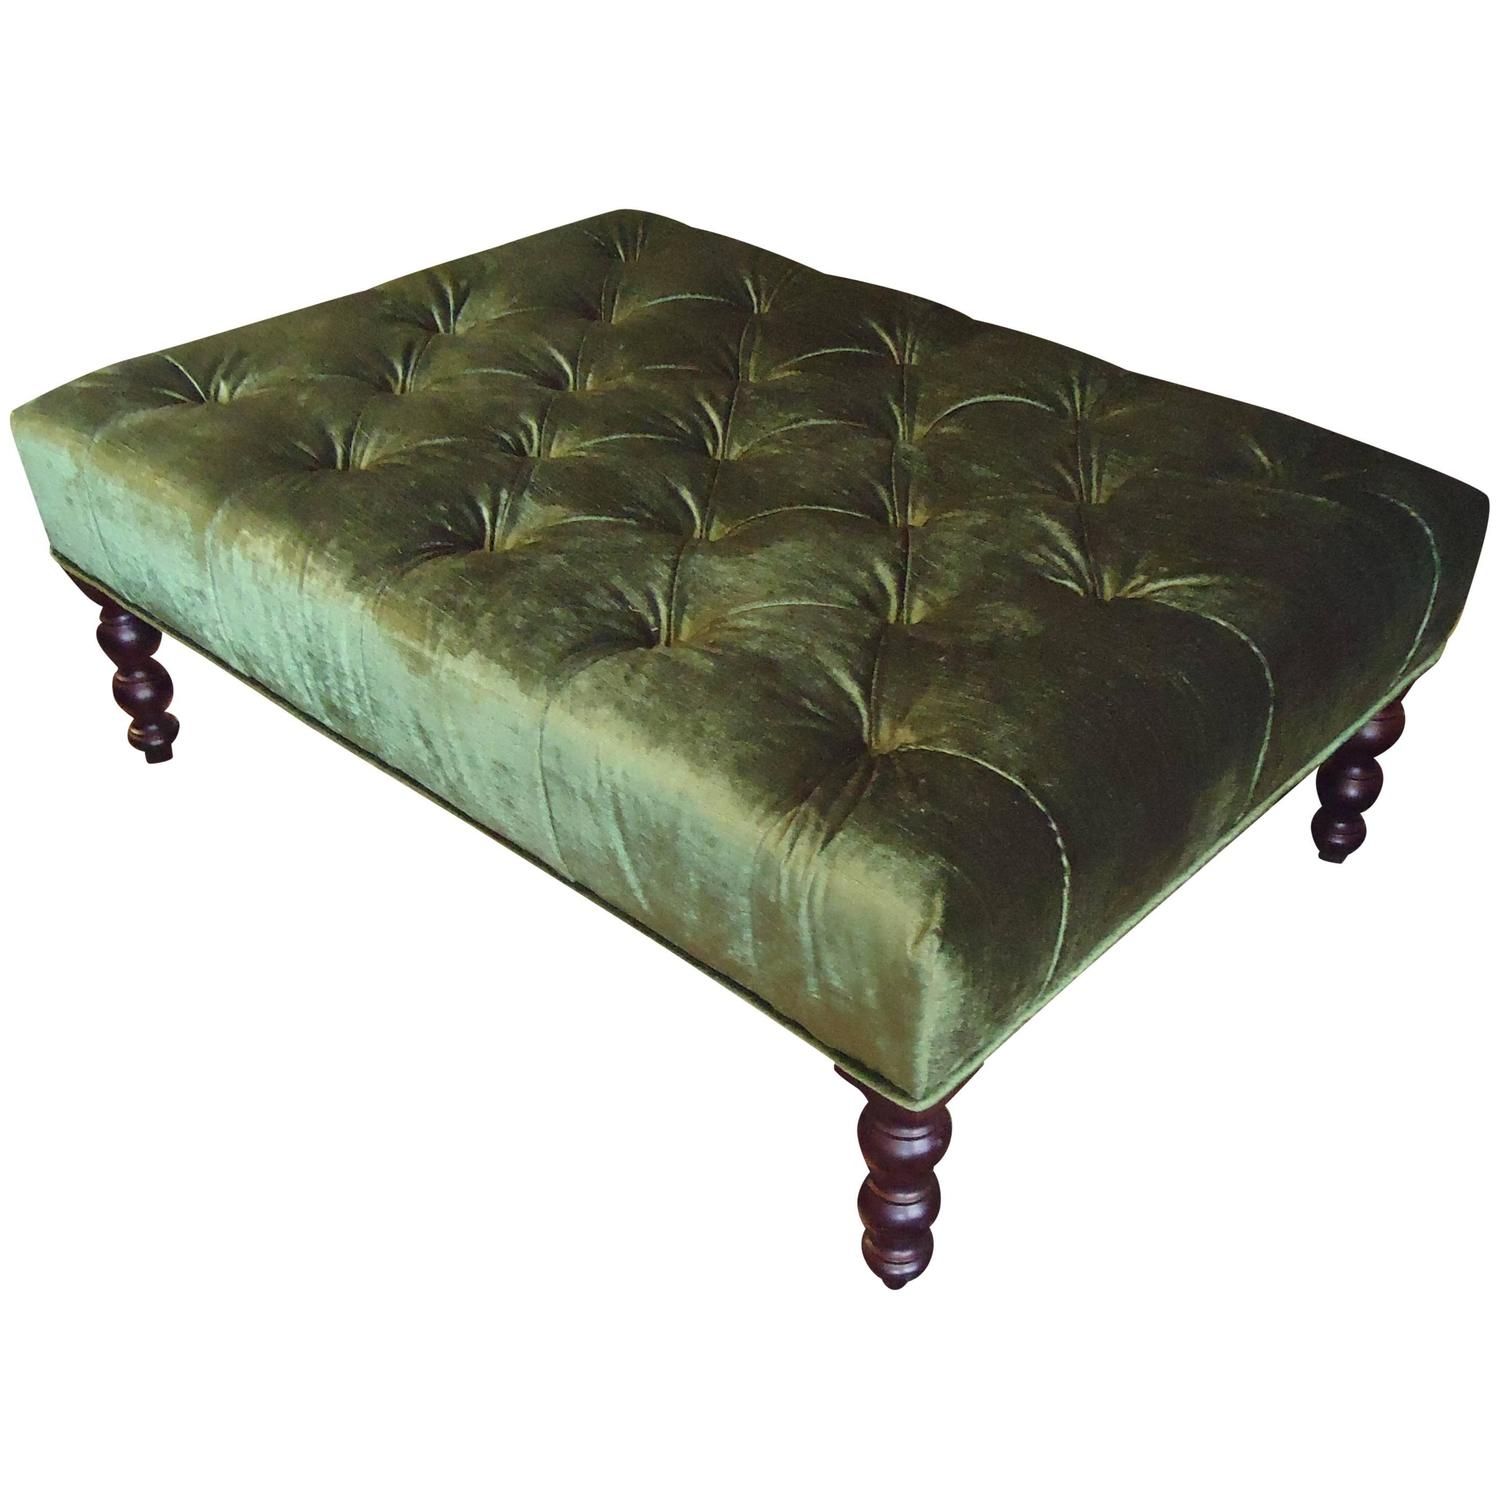 Rich Green Tufted Velvet Ottoman For Sale At 1stdibs Regarding Green Pouf Ottomans (View 19 of 20)